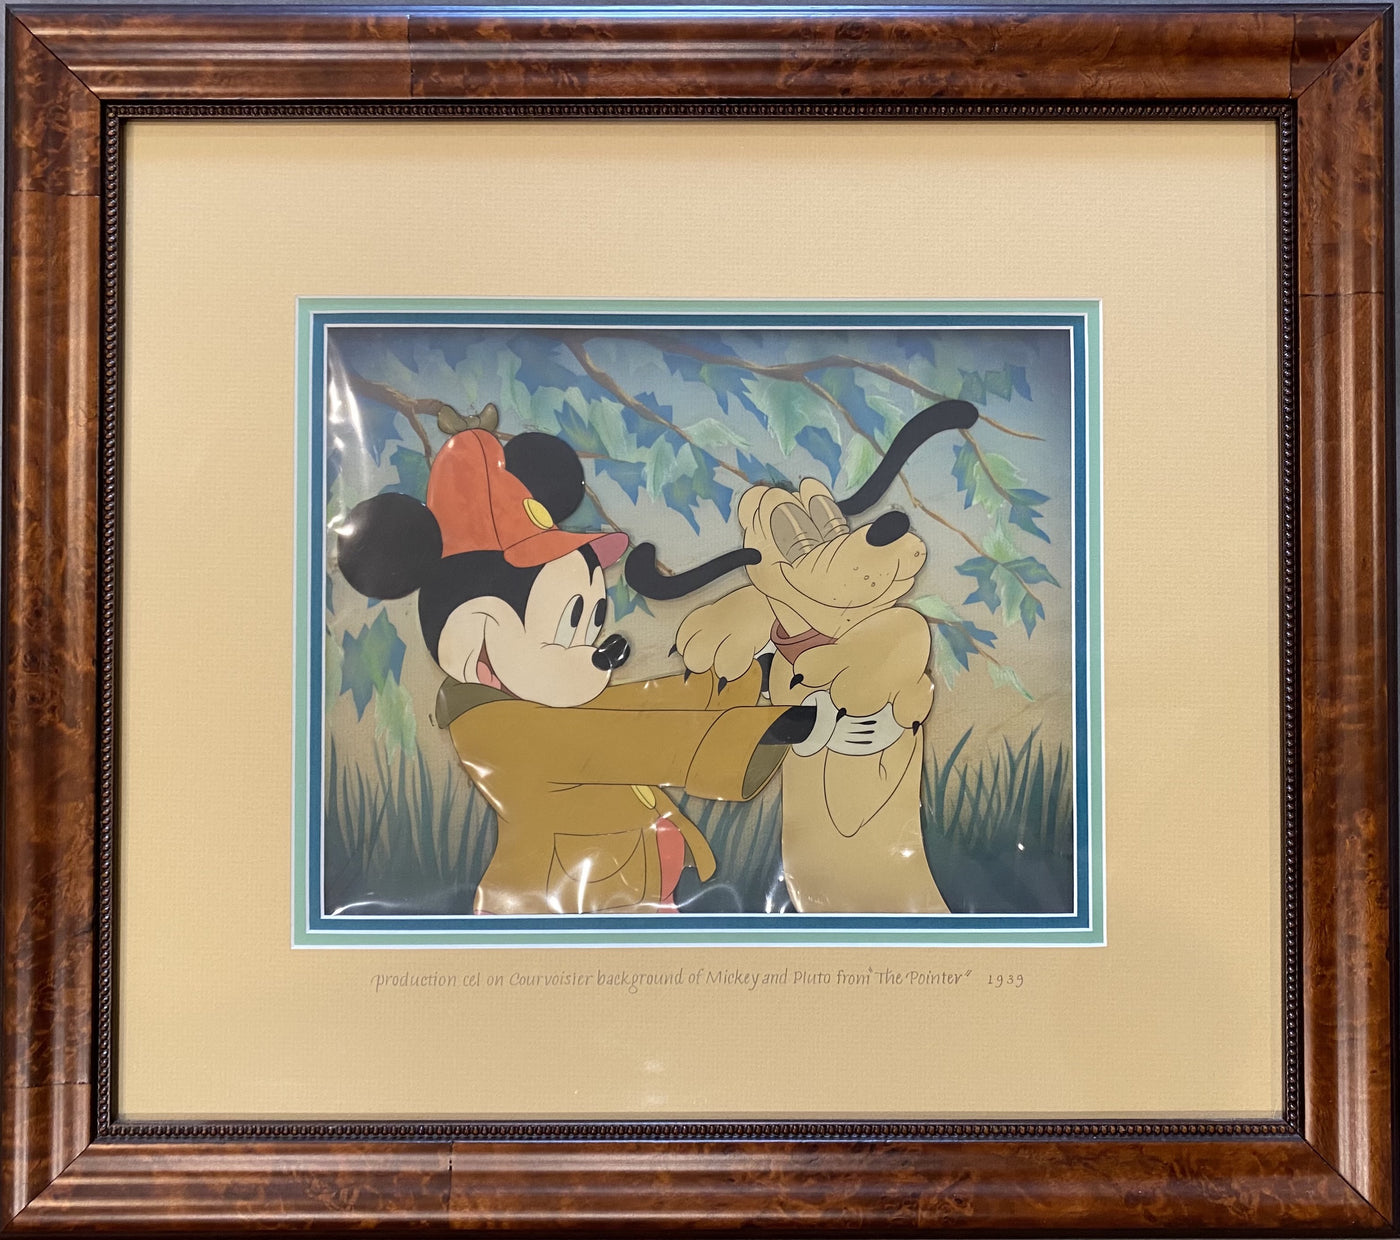 Original Walt Disney Production Cel on a Courvoiser Background from The Pointer (1939)